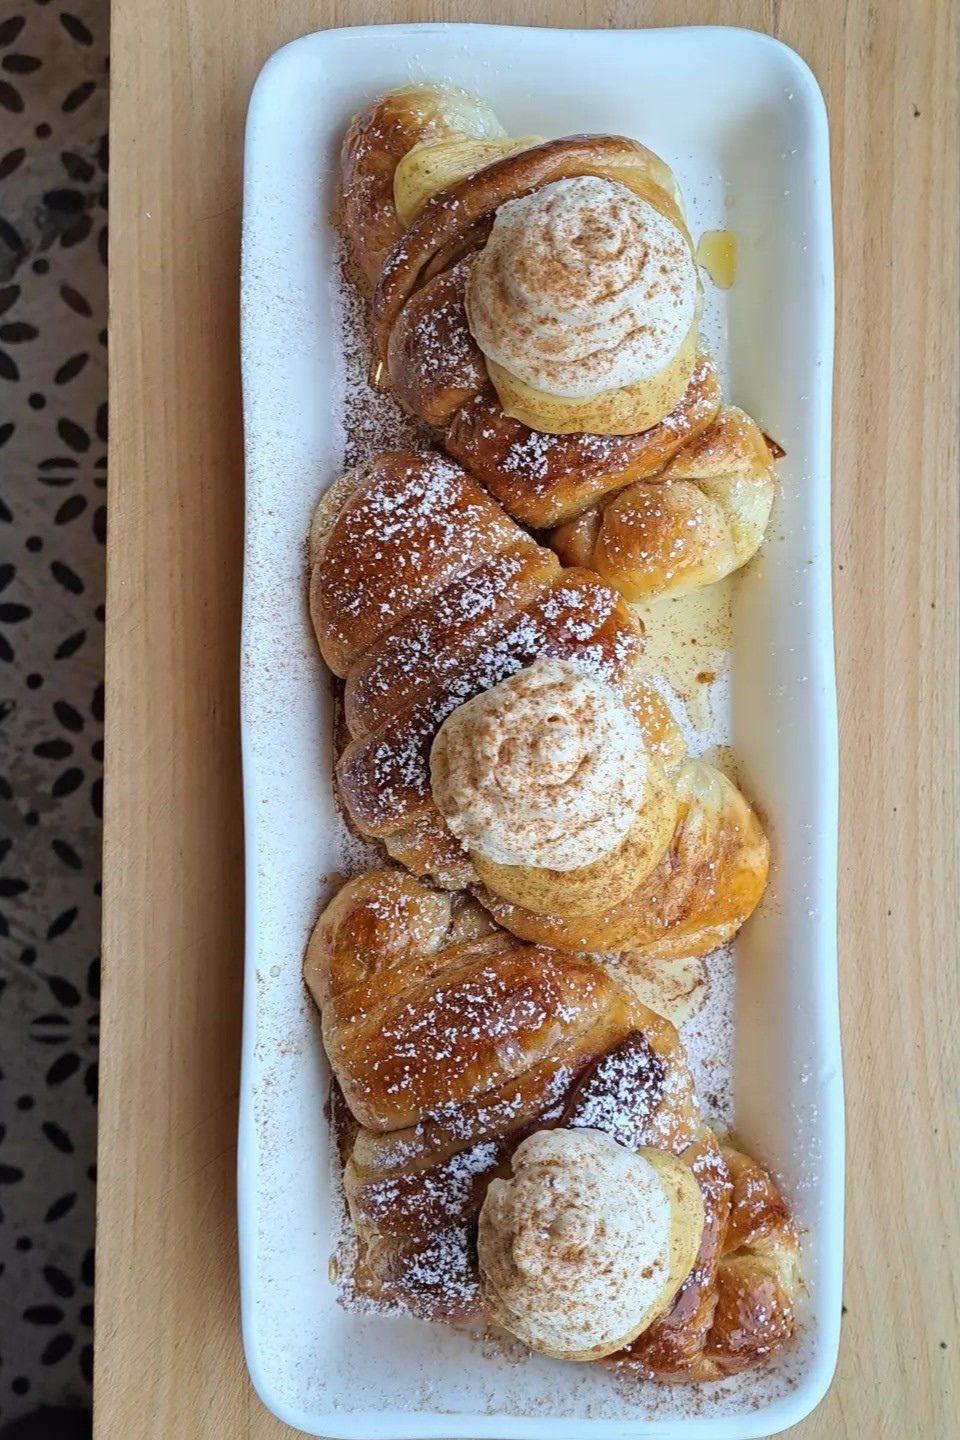 Pumpkin pie whipped ricotta croissant from Blue Heron Farm & Bakery sit on a white tray